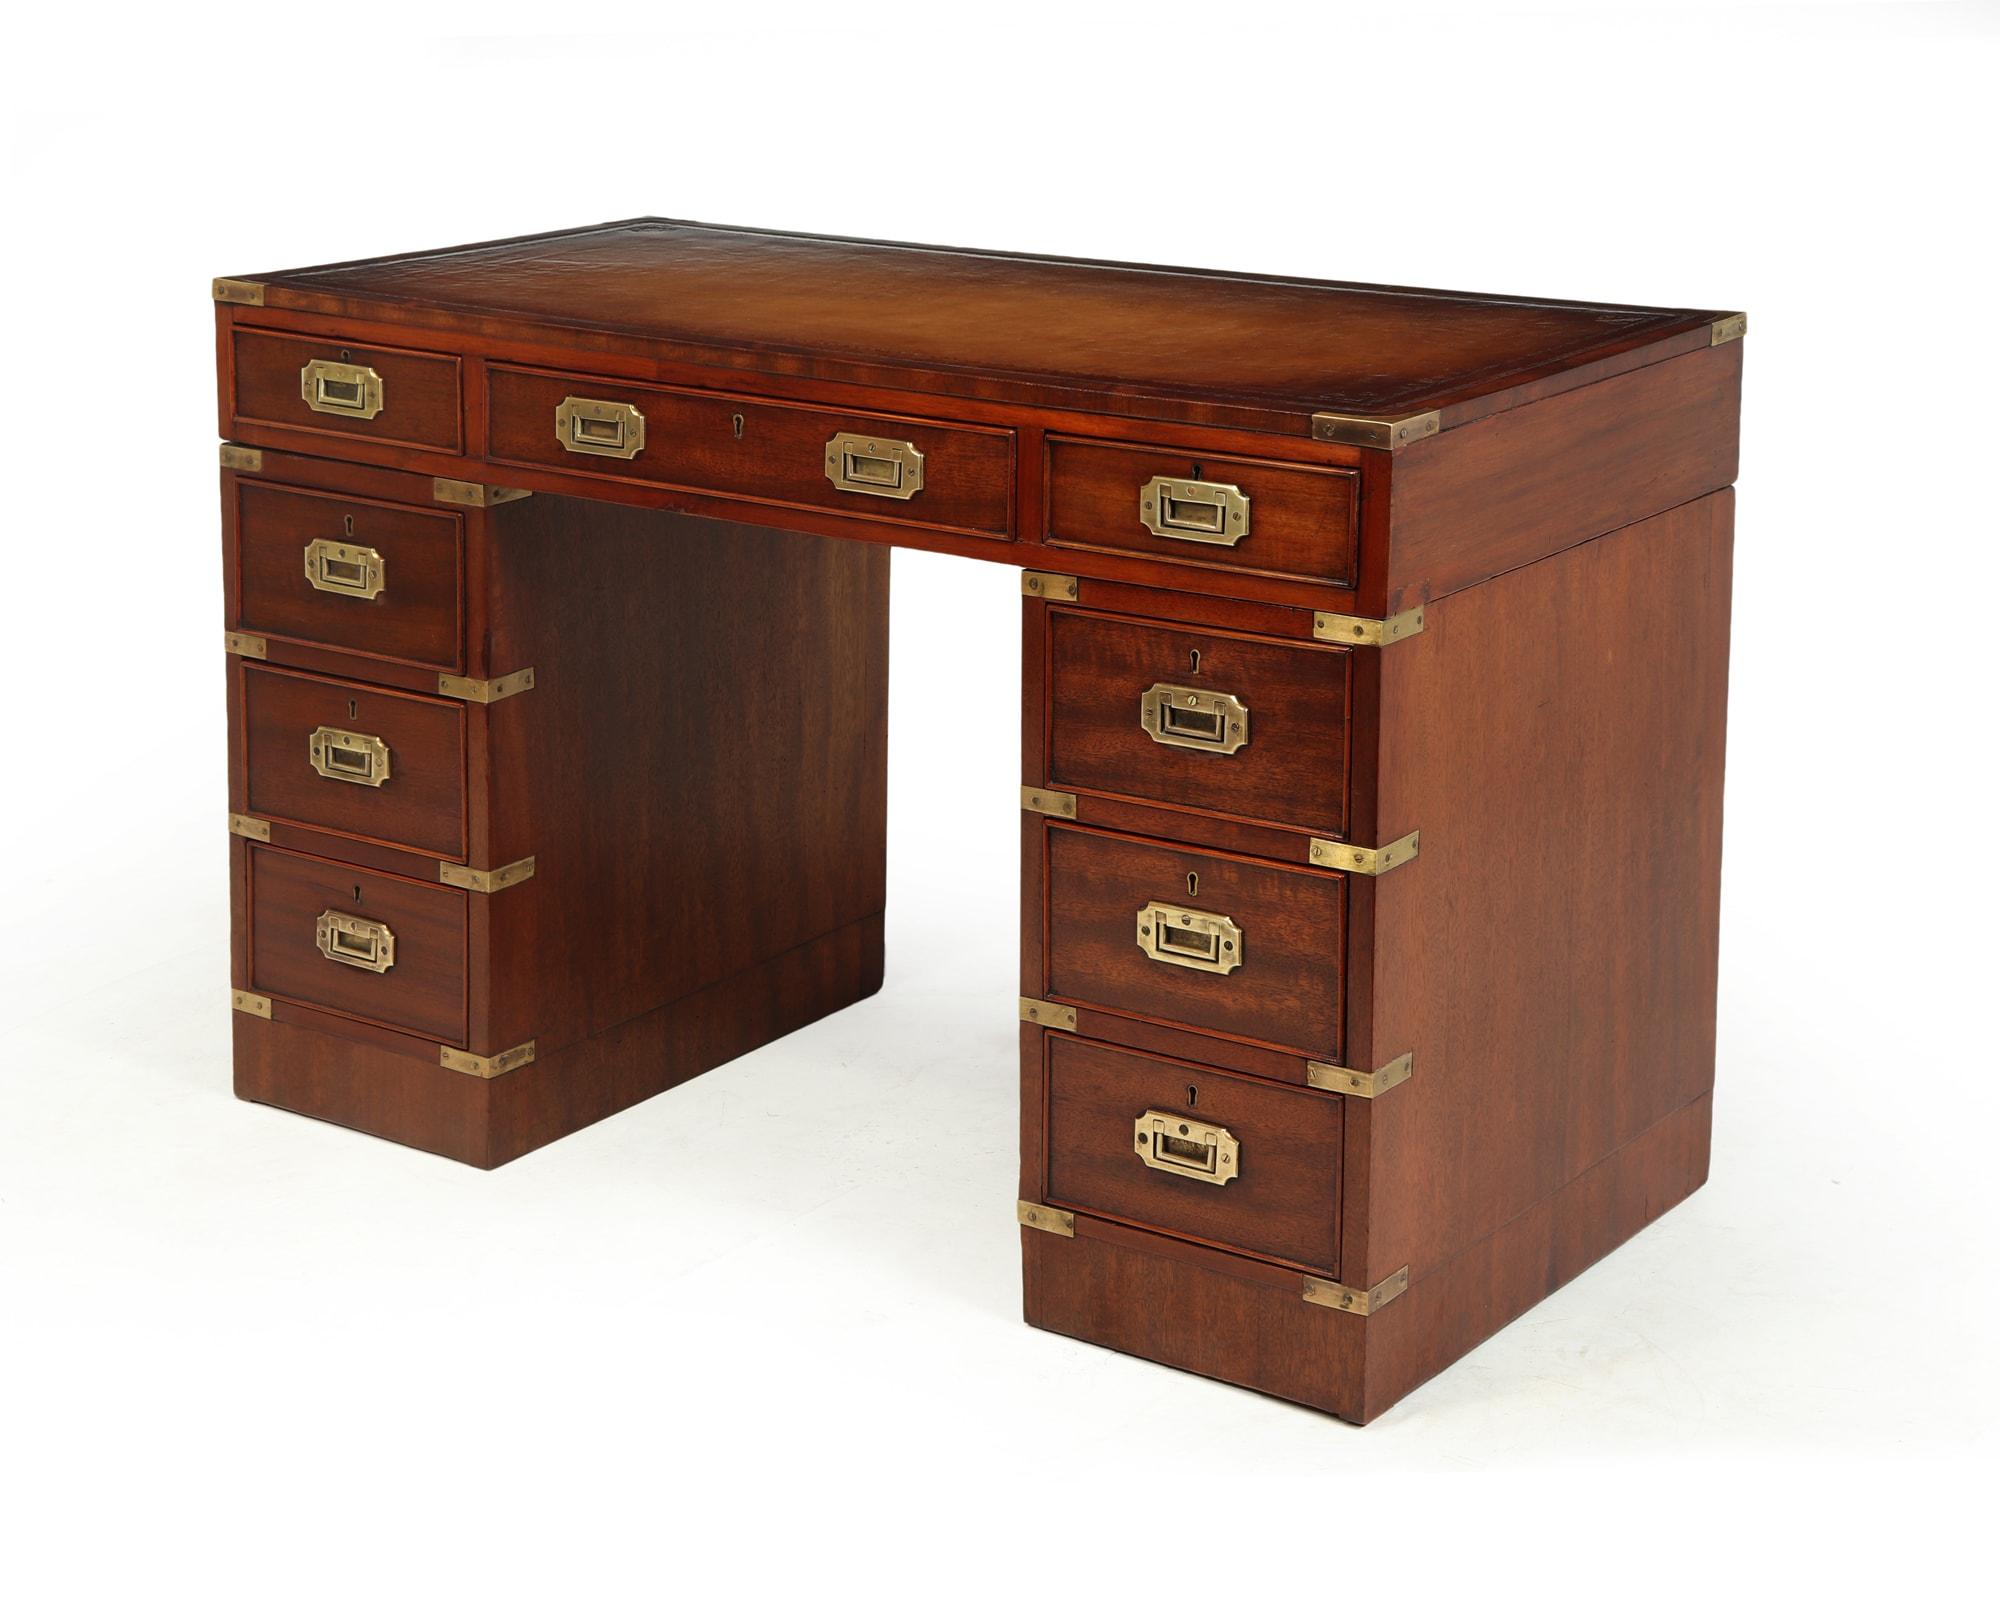 A lovely military style desk from around 1860, Structurally sound, the desk has had repairs in its lifetime, some locks have been changed the desk has great patina and colour variations to the wood.

The desk has been professionally restored and